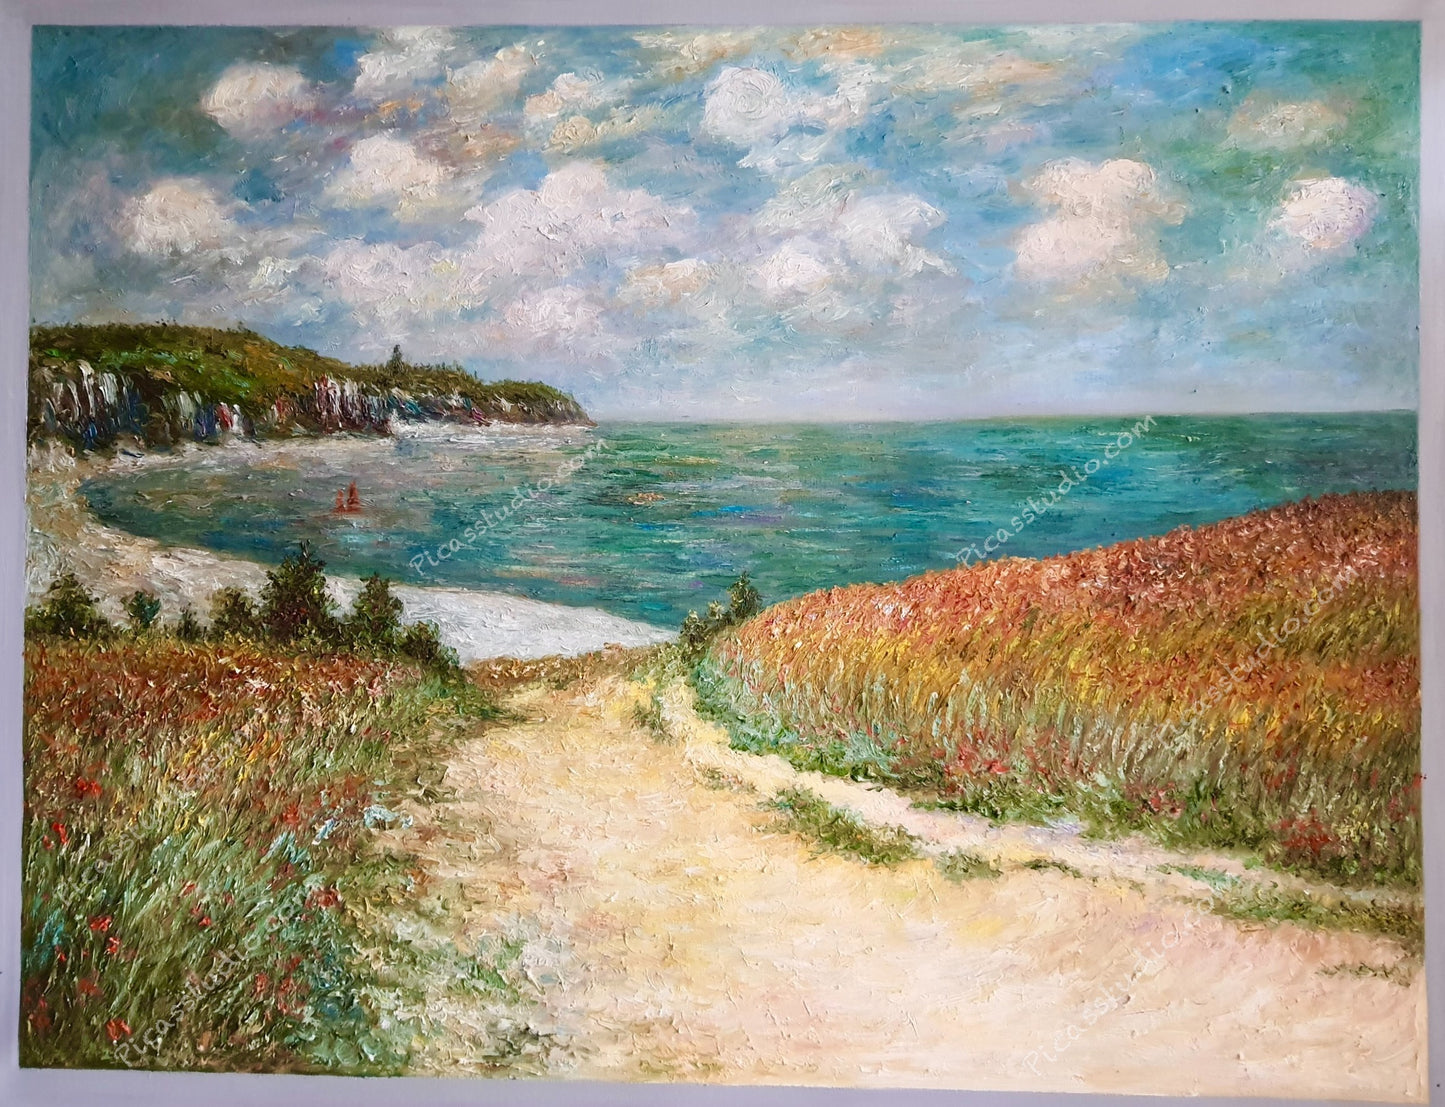 Claude Monet Oil Painting Path in the Wheat Fields at Pourville Hand Painted Art on Canvas Wall Decor Unframed